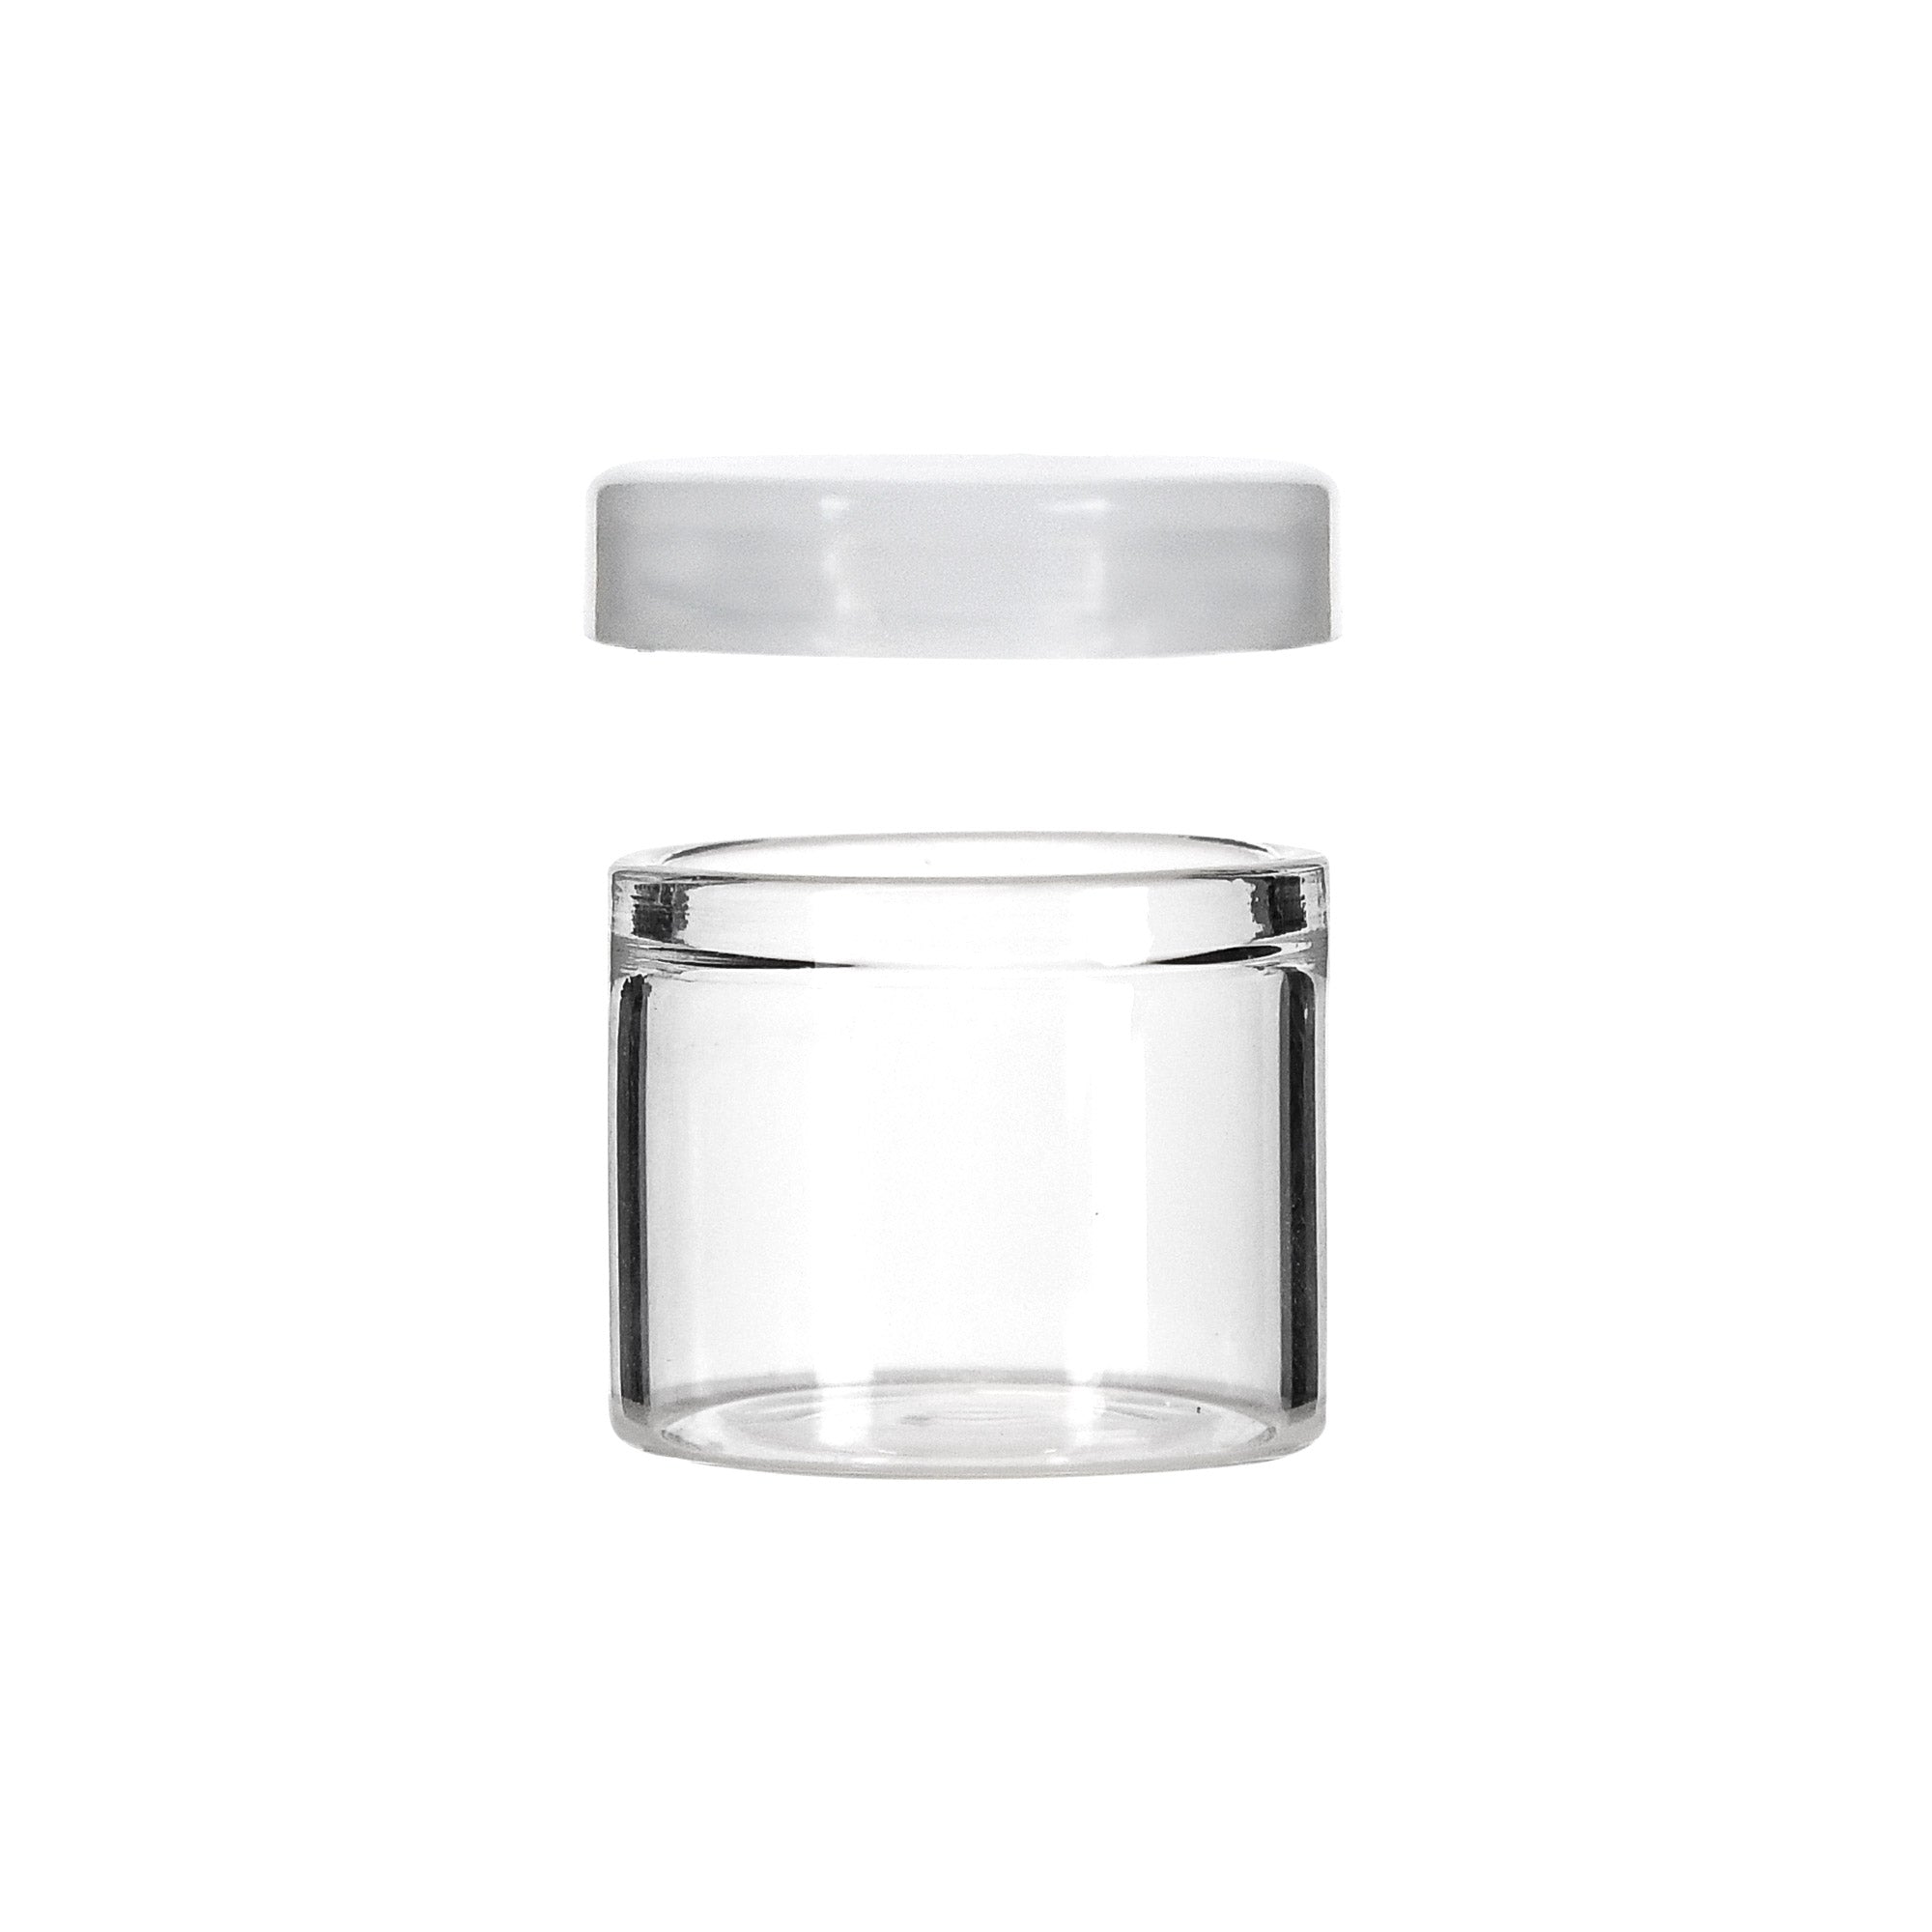 Plastic Polystyrene Concentrate Container Lined With White Silicone Insert  - .34 oz / 10 ml Mini Scoop